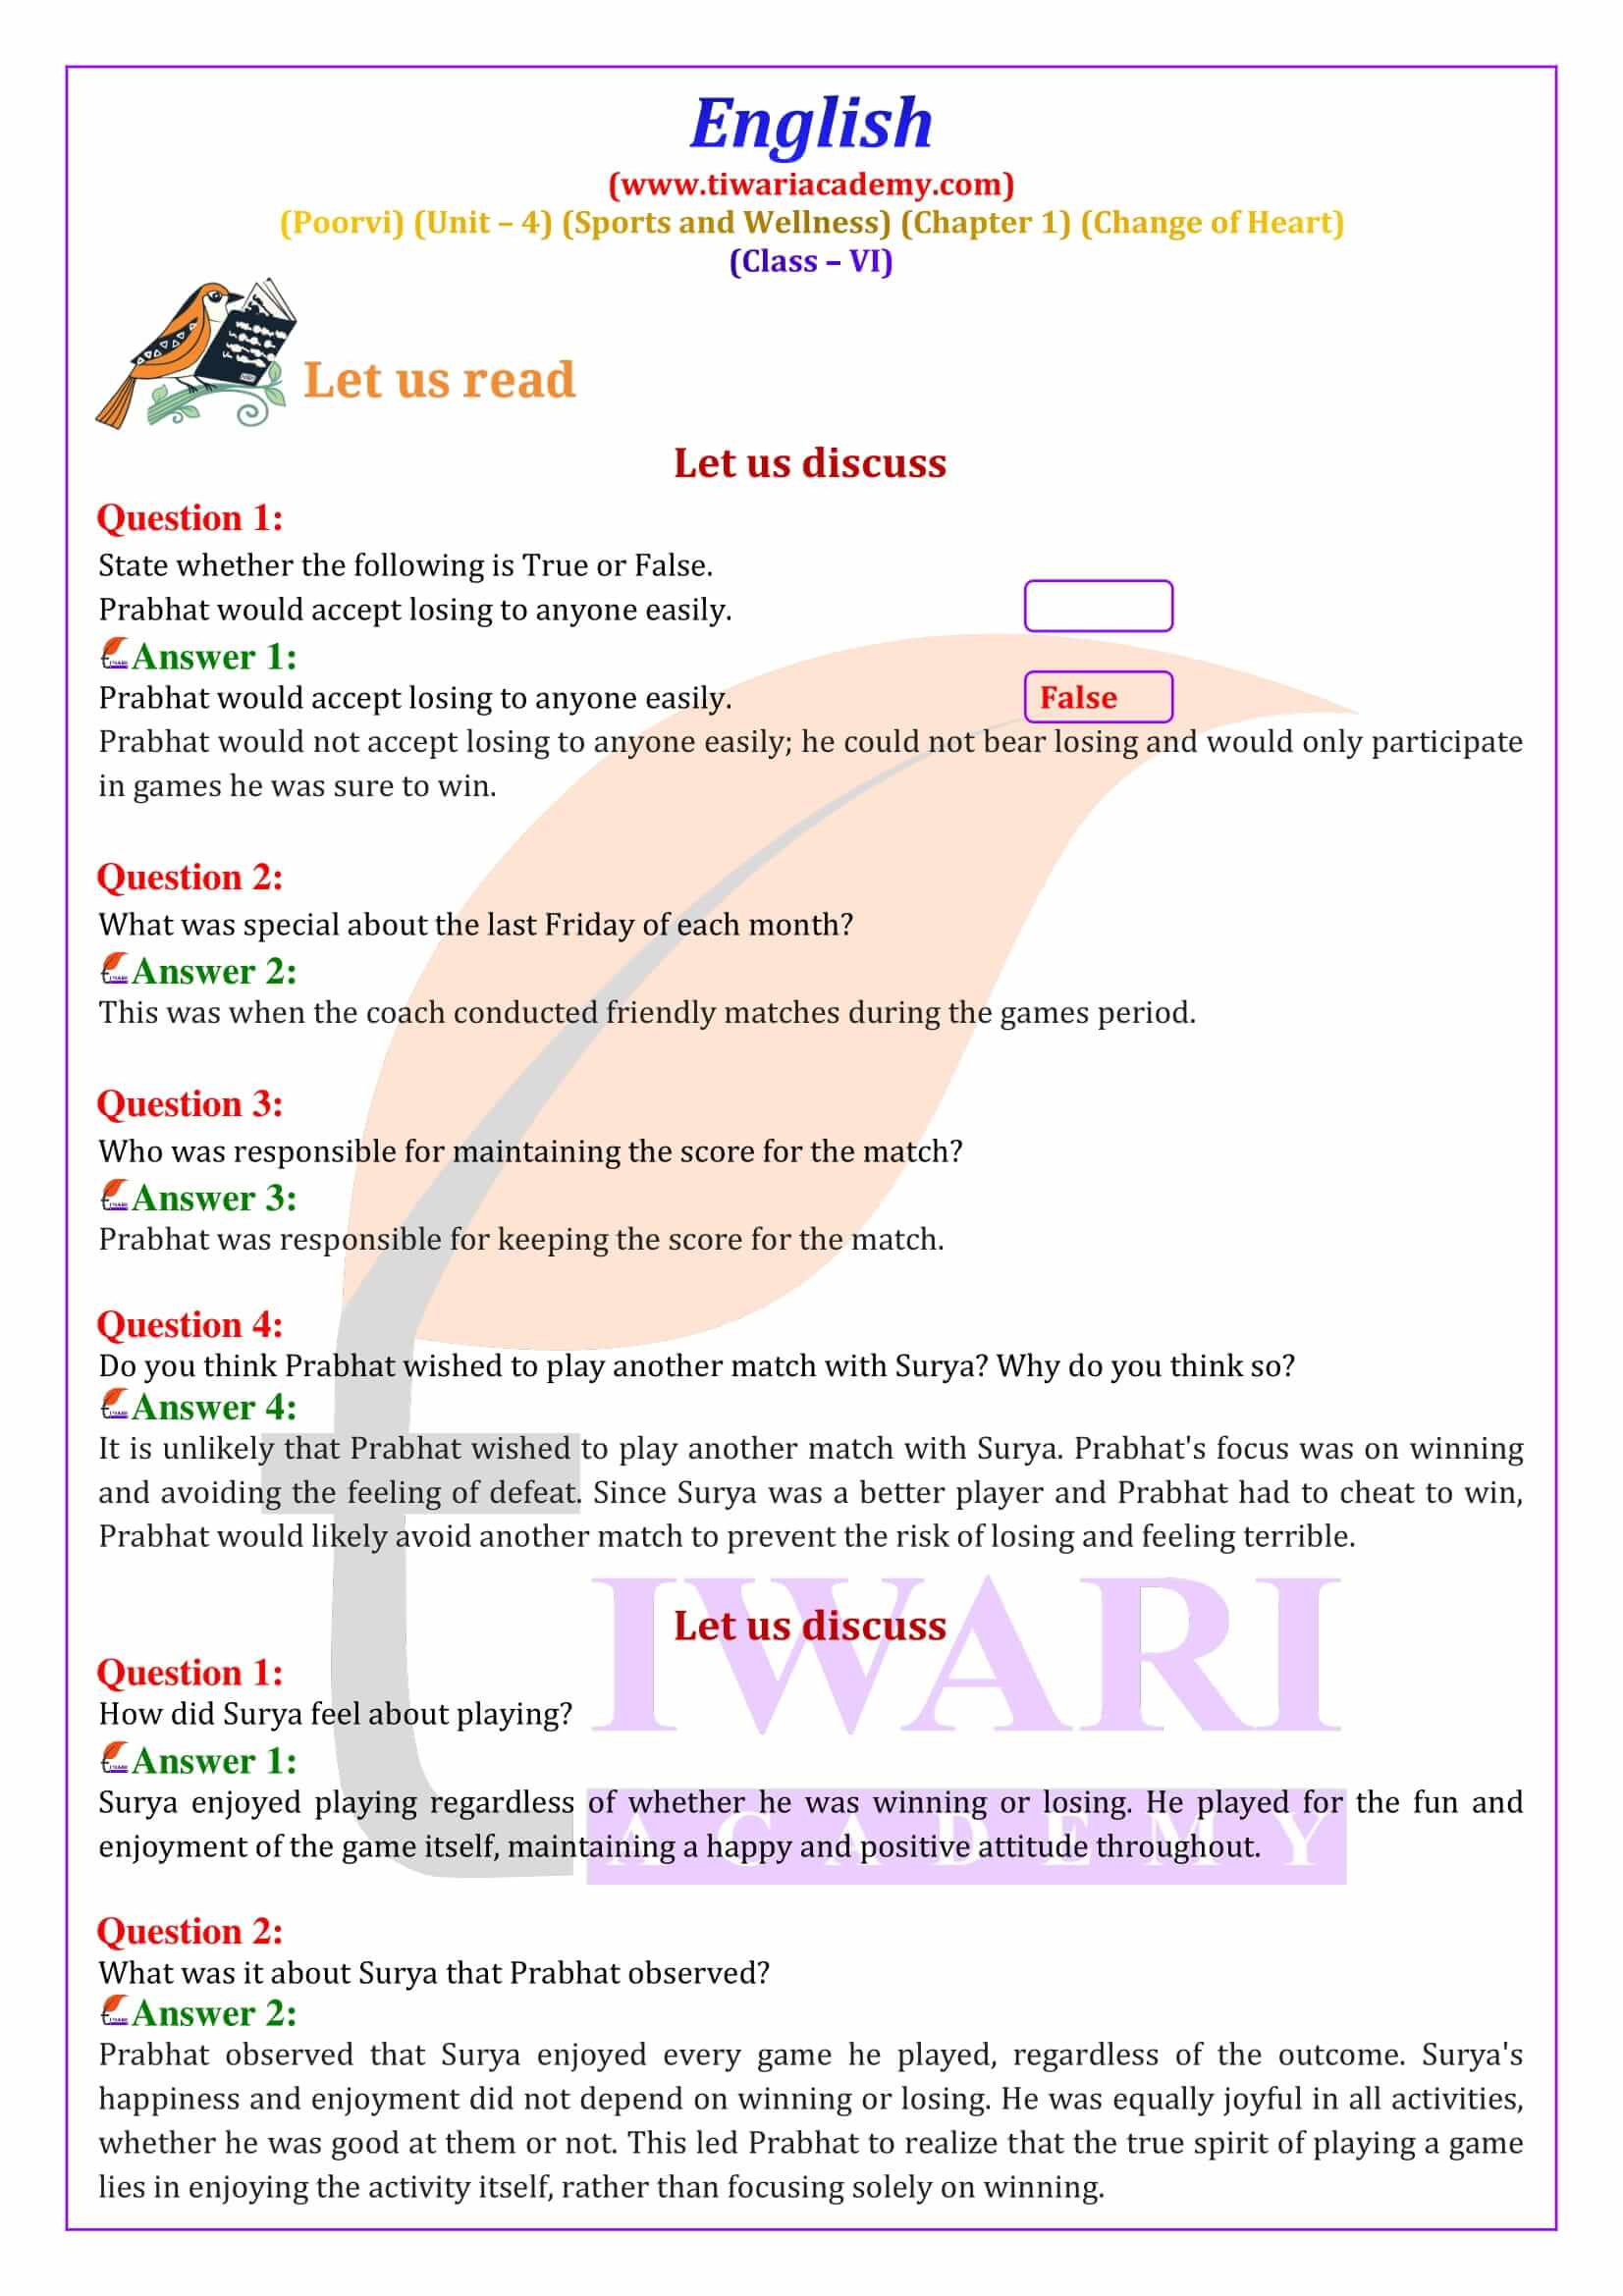 Class 6 English Poorvi Unit 4 Sports and Wellness Chapter 1 Change of Heart Solutions